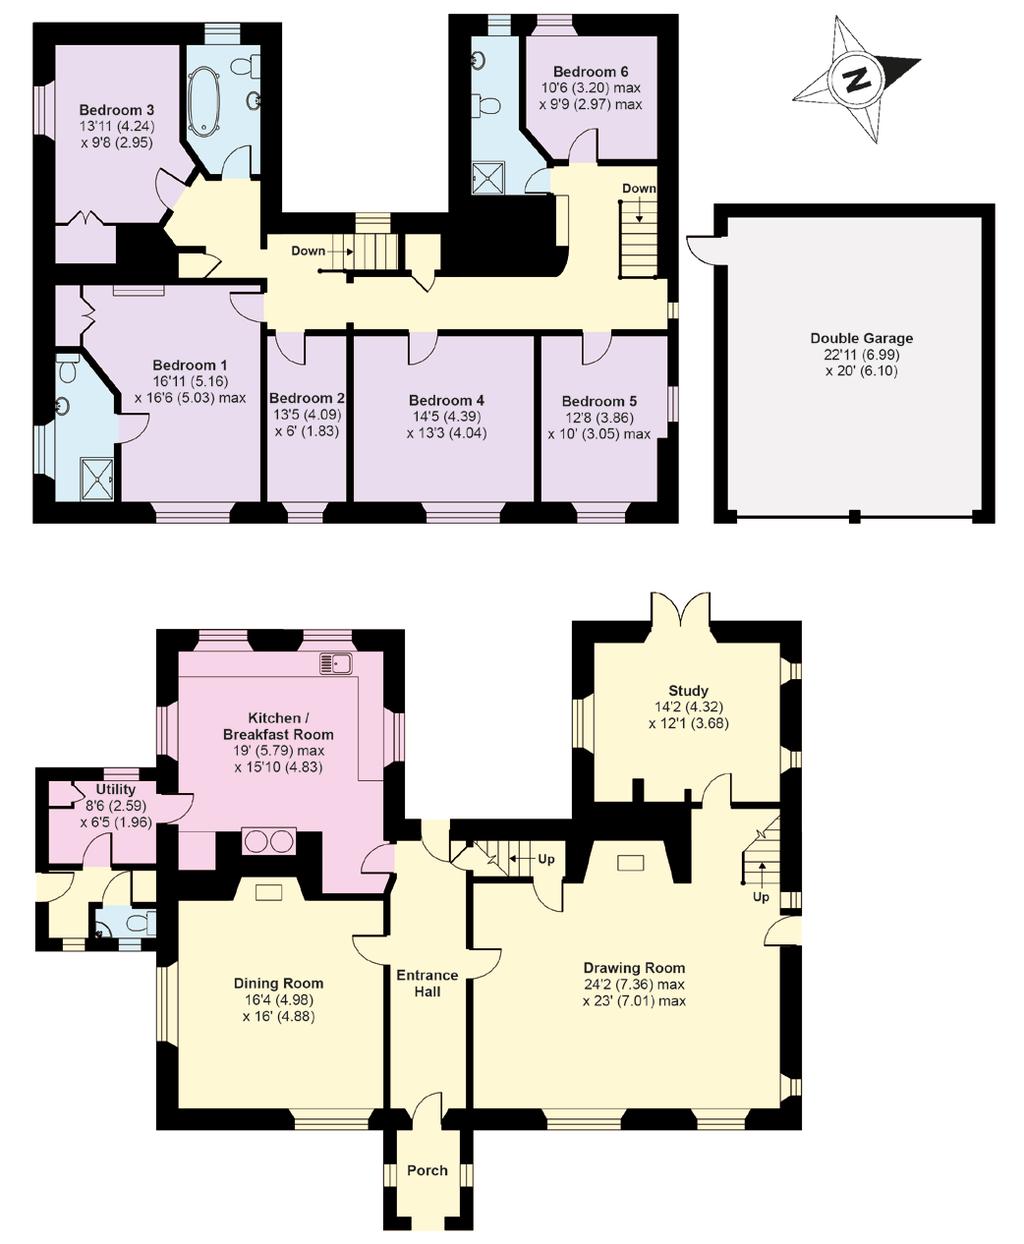 First Floor Approximate Gross Internal Floor Area 3520 sq.ft / 327 sq.m (includes Garage) Reception Bedroom Bathroom Kitchen/Utility Storage Ordnance Survey Crown Copyright 2016. All rights reserved.